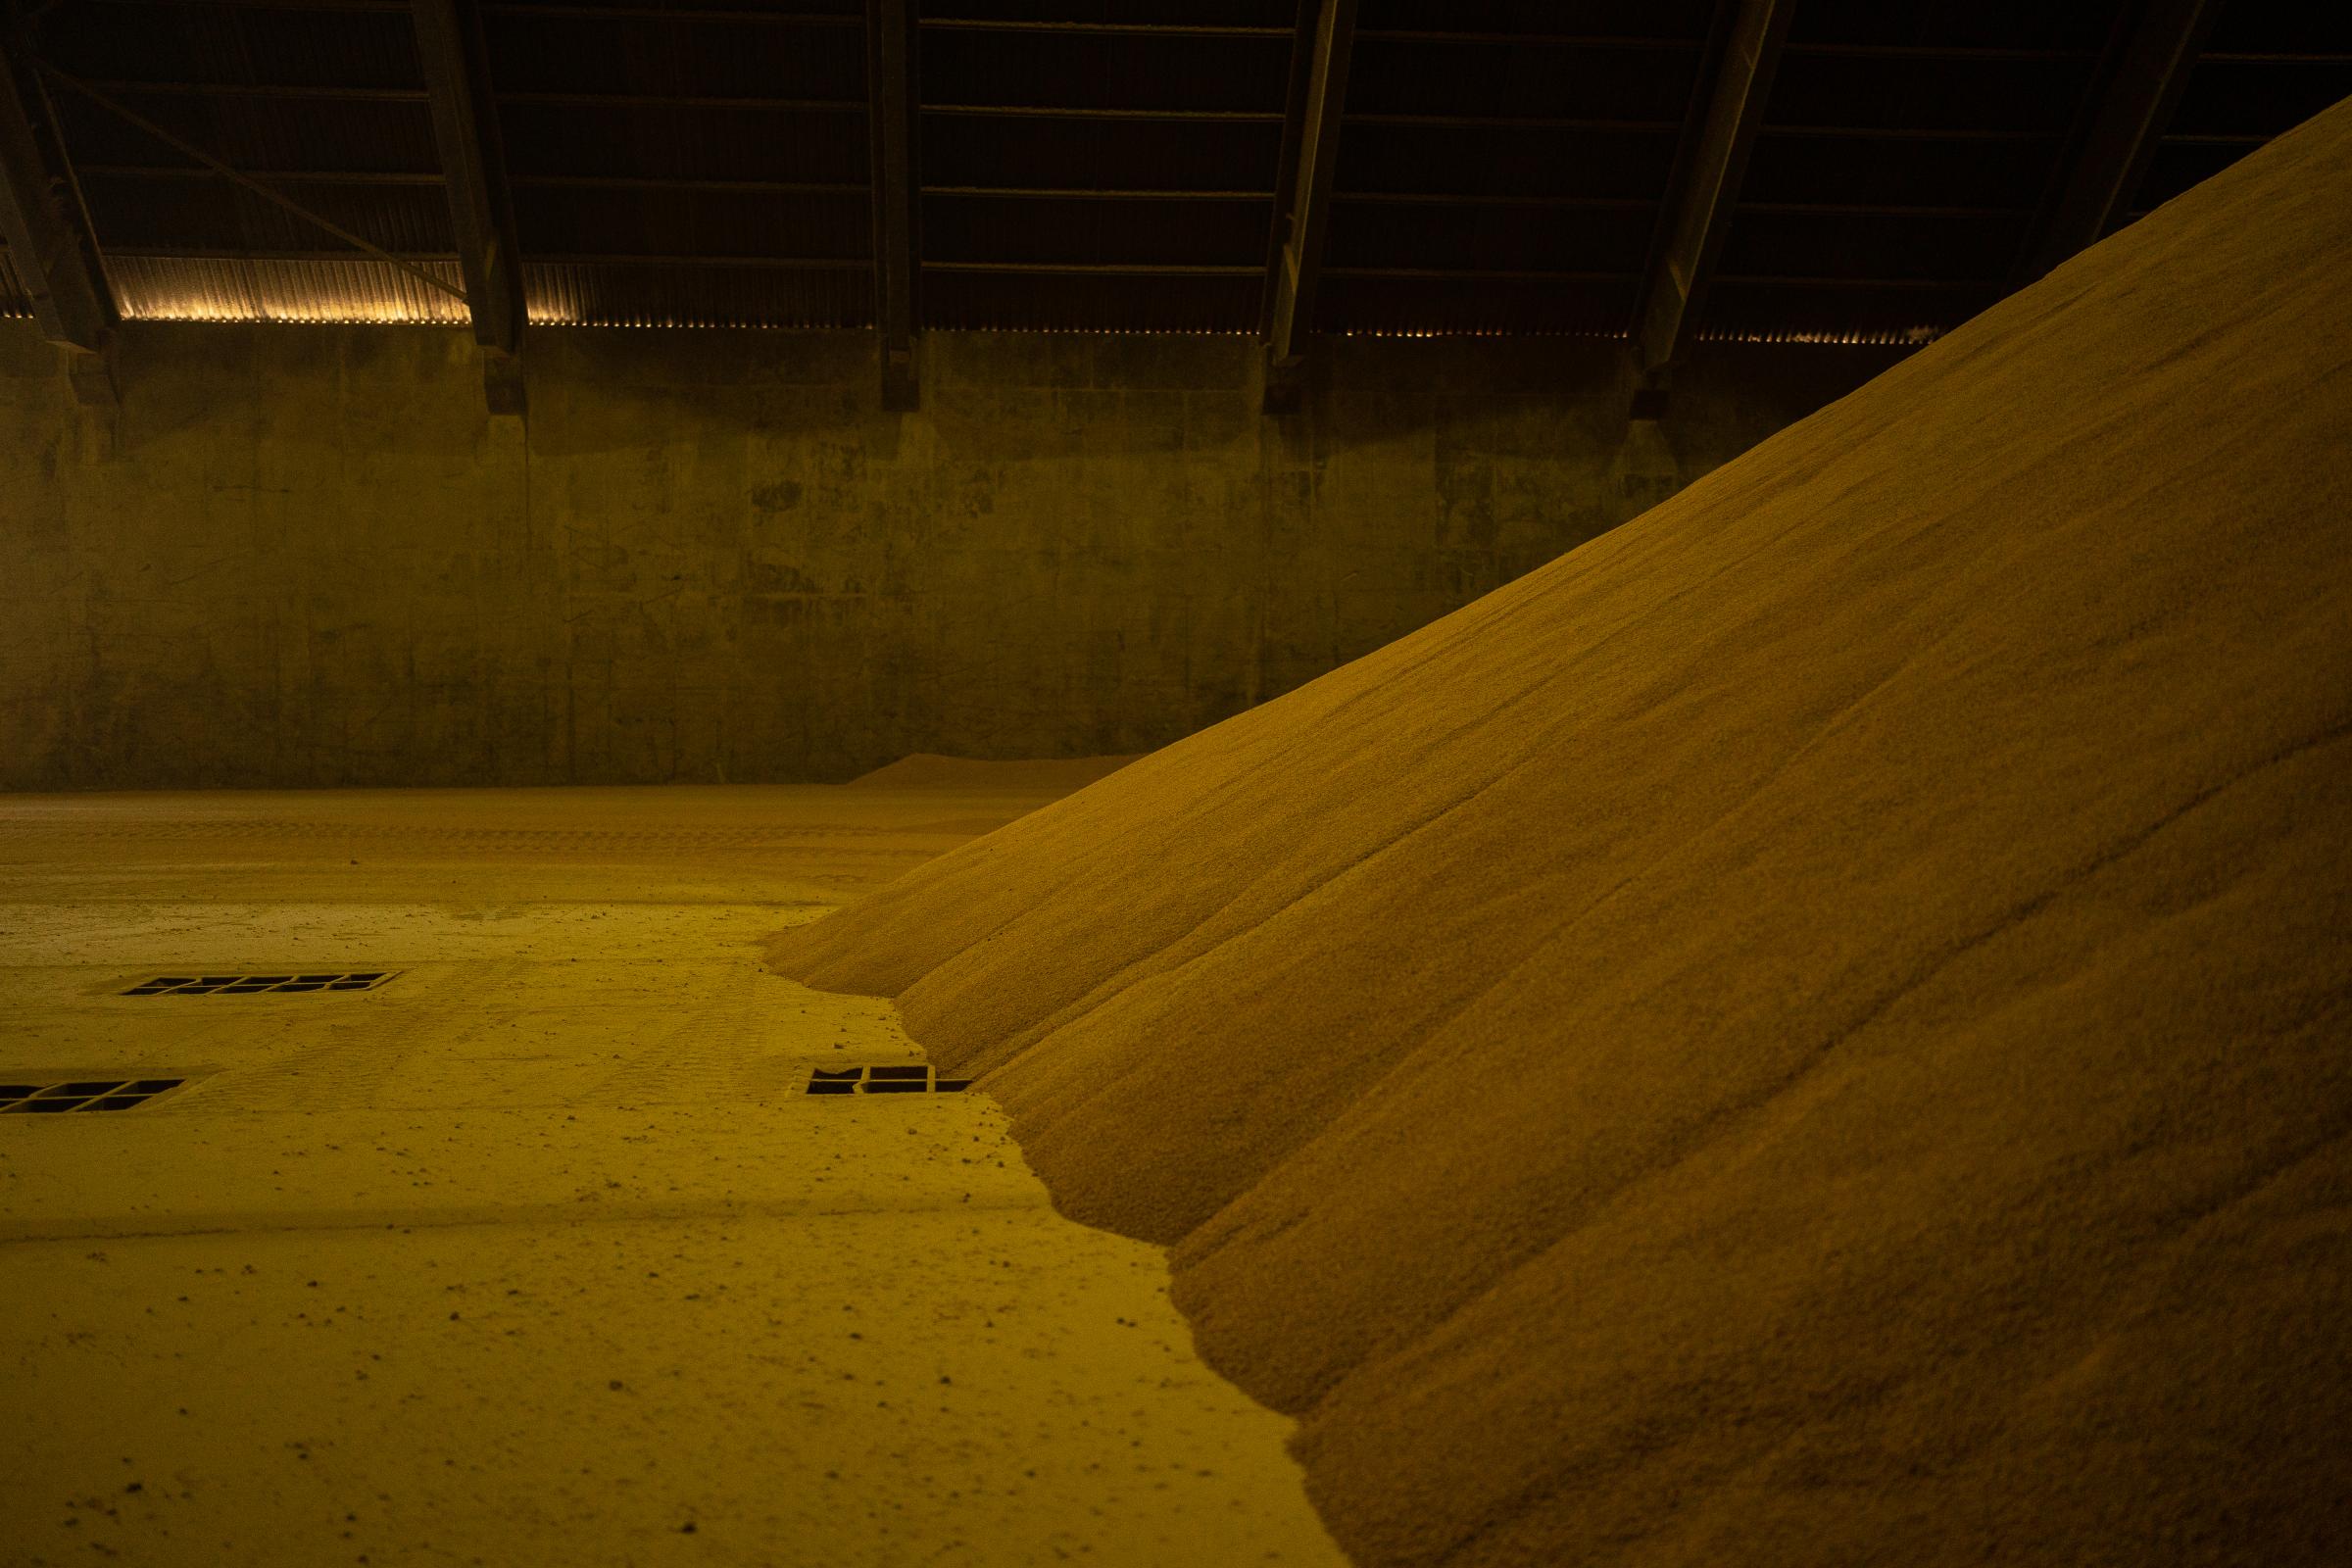 Argentine soybeans - Mountains of soy flour in the warehouses at a Molinos...